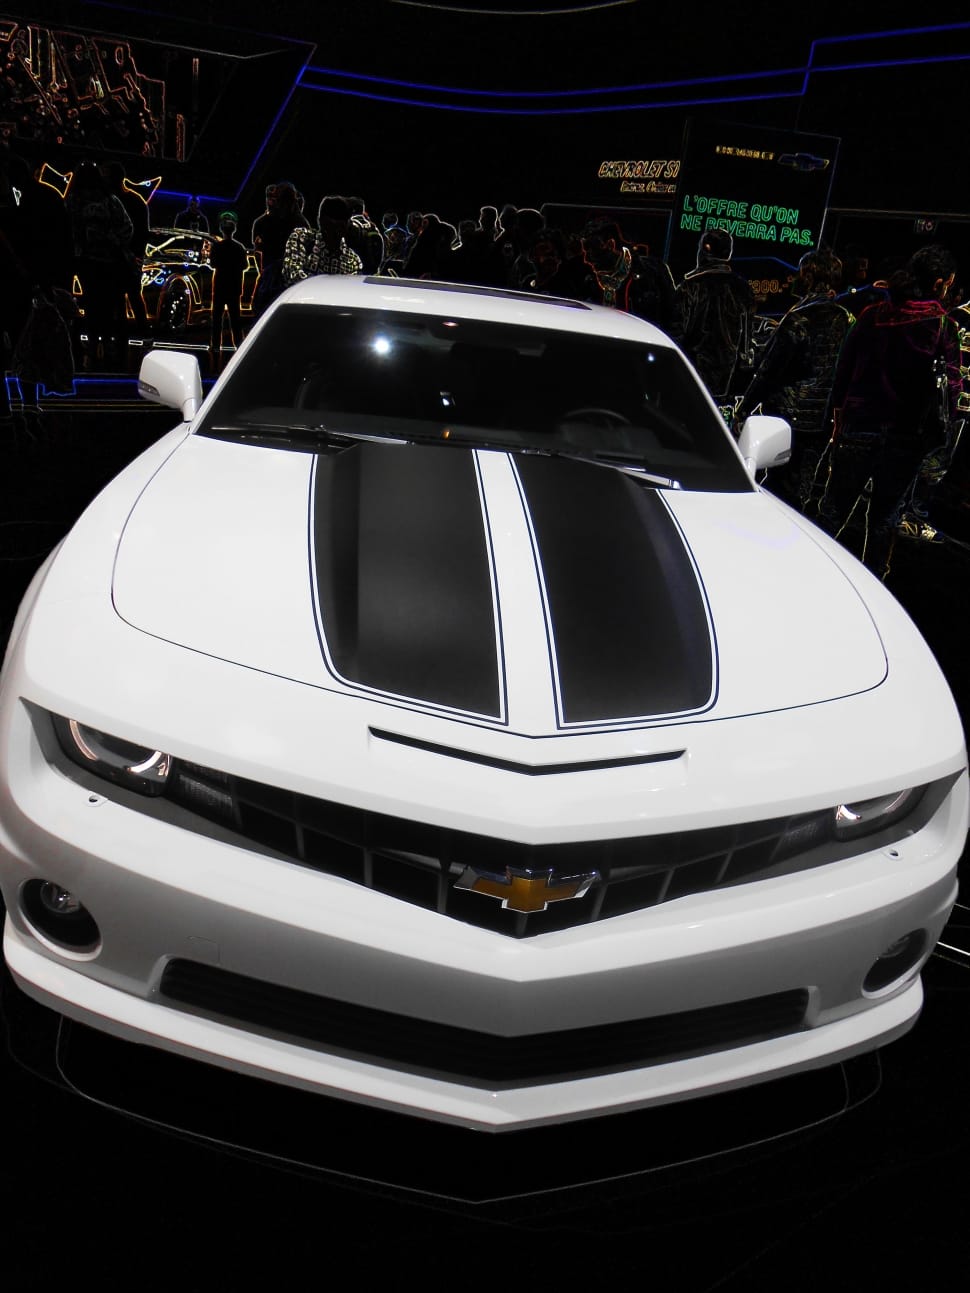 white and black Chevrolet Camaro with people gathering at motor show preview